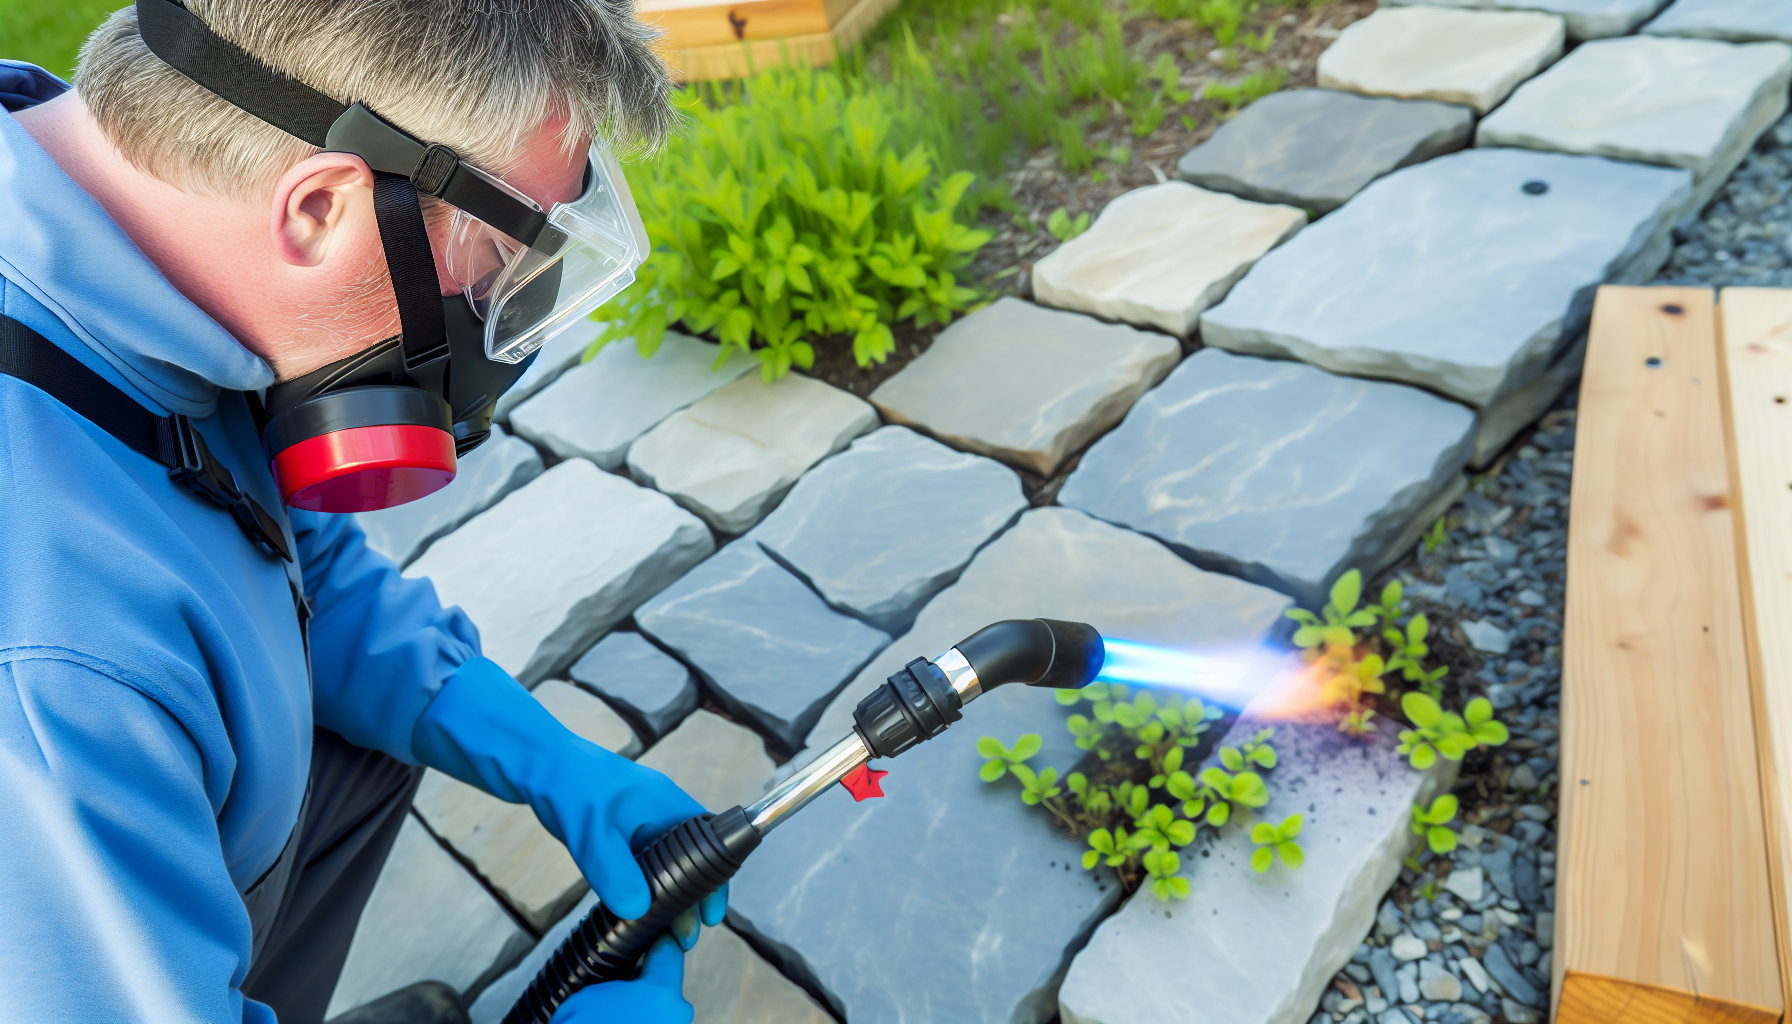 Using a weed torch to eliminate weeds between pavers